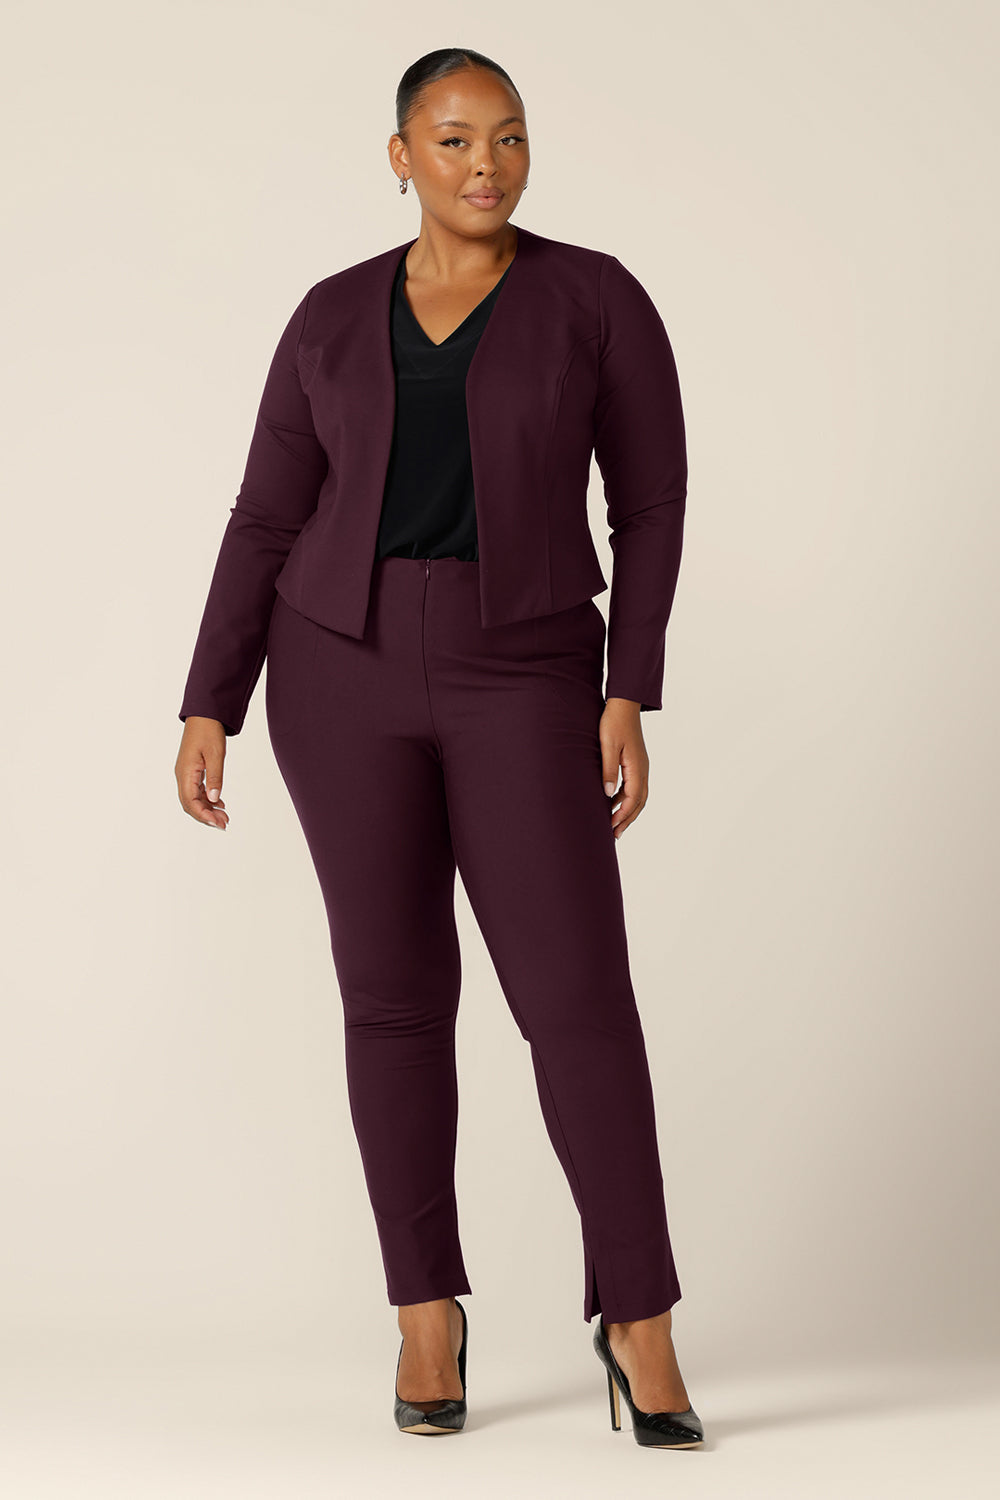 A good workwear jacket for fuller figure women, the Mackenzie Jacket in Mulberry is available to shop in sizes 8 to 24. Made in Australia by Australian and New Zealand women's clothing label, L&F, this work jacket is a collarless and open fronted with long sleeves and an angled hem. This corporate jacket is worn with slim leg pants and a black, V-neck top.